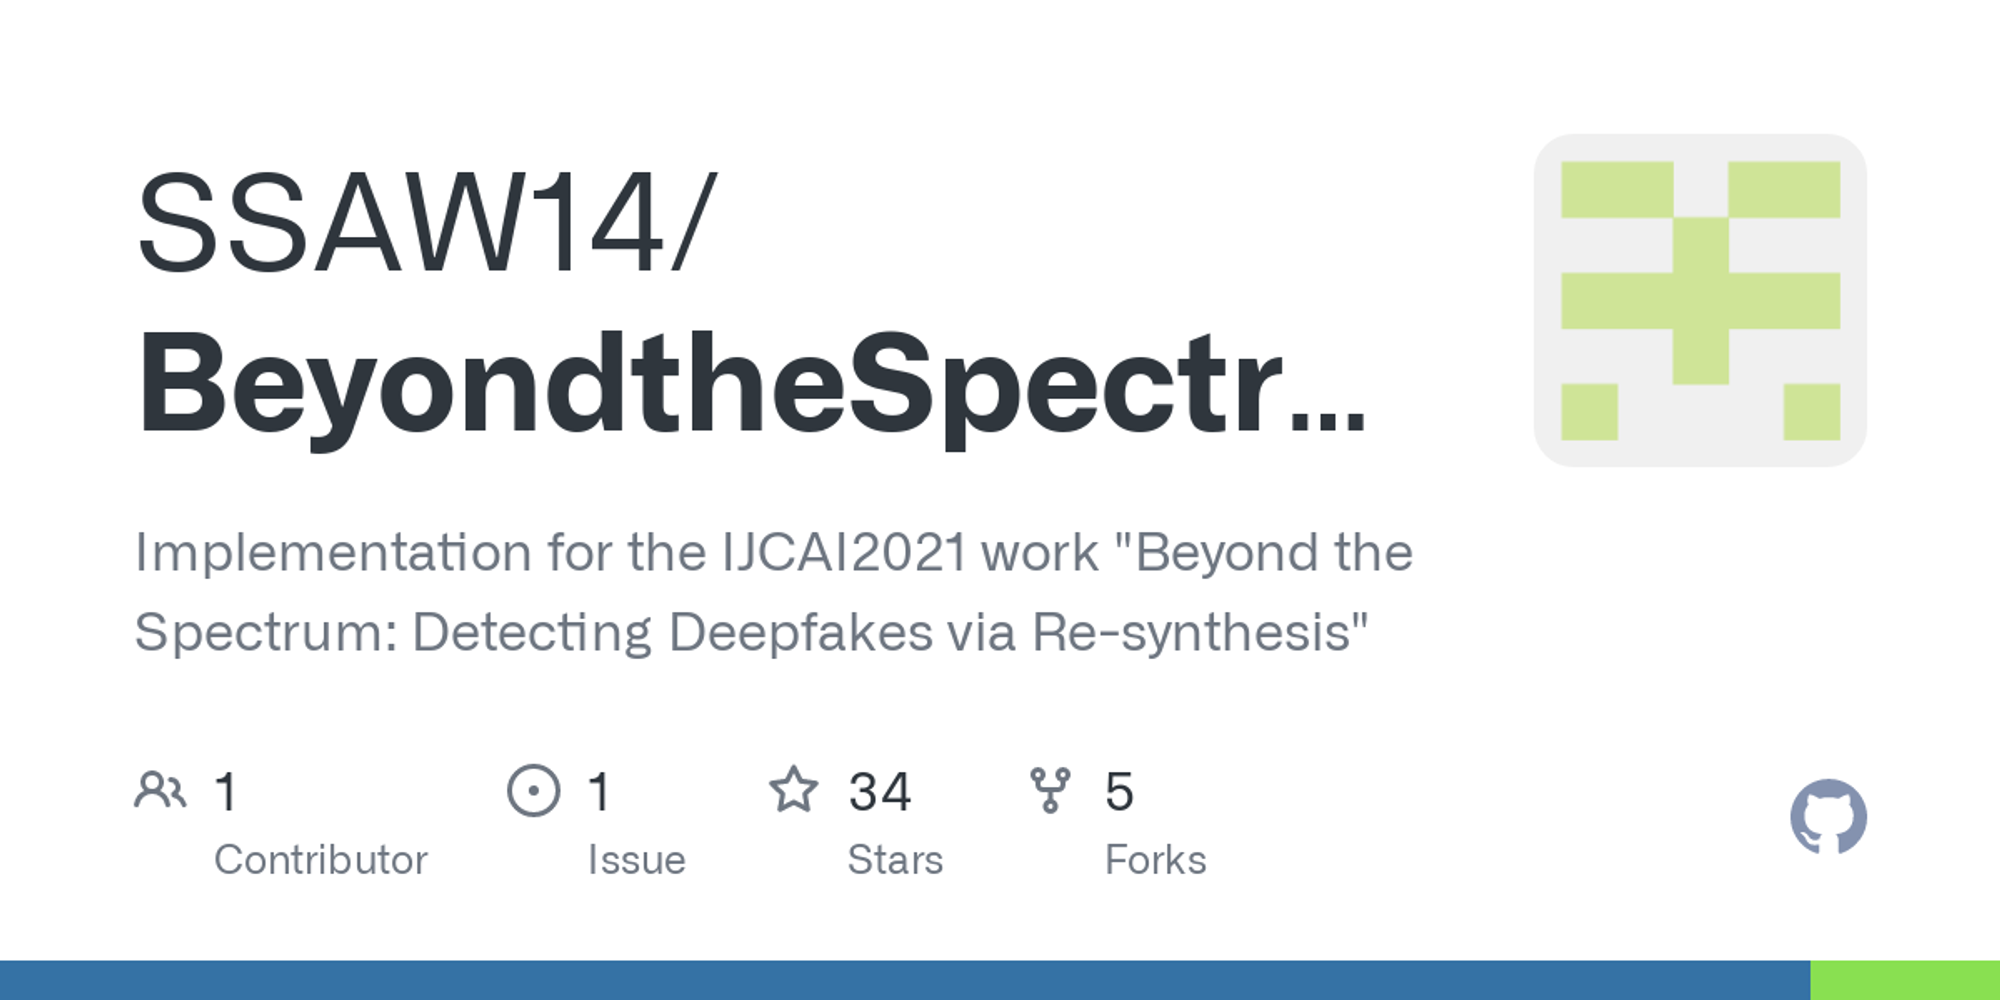 GitHub - SSAW14/BeyondtheSpectrum: Implementation for the IJCAI2021 work "Beyond the Spectrum: Detecting Deepfakes via Re-synthesis"